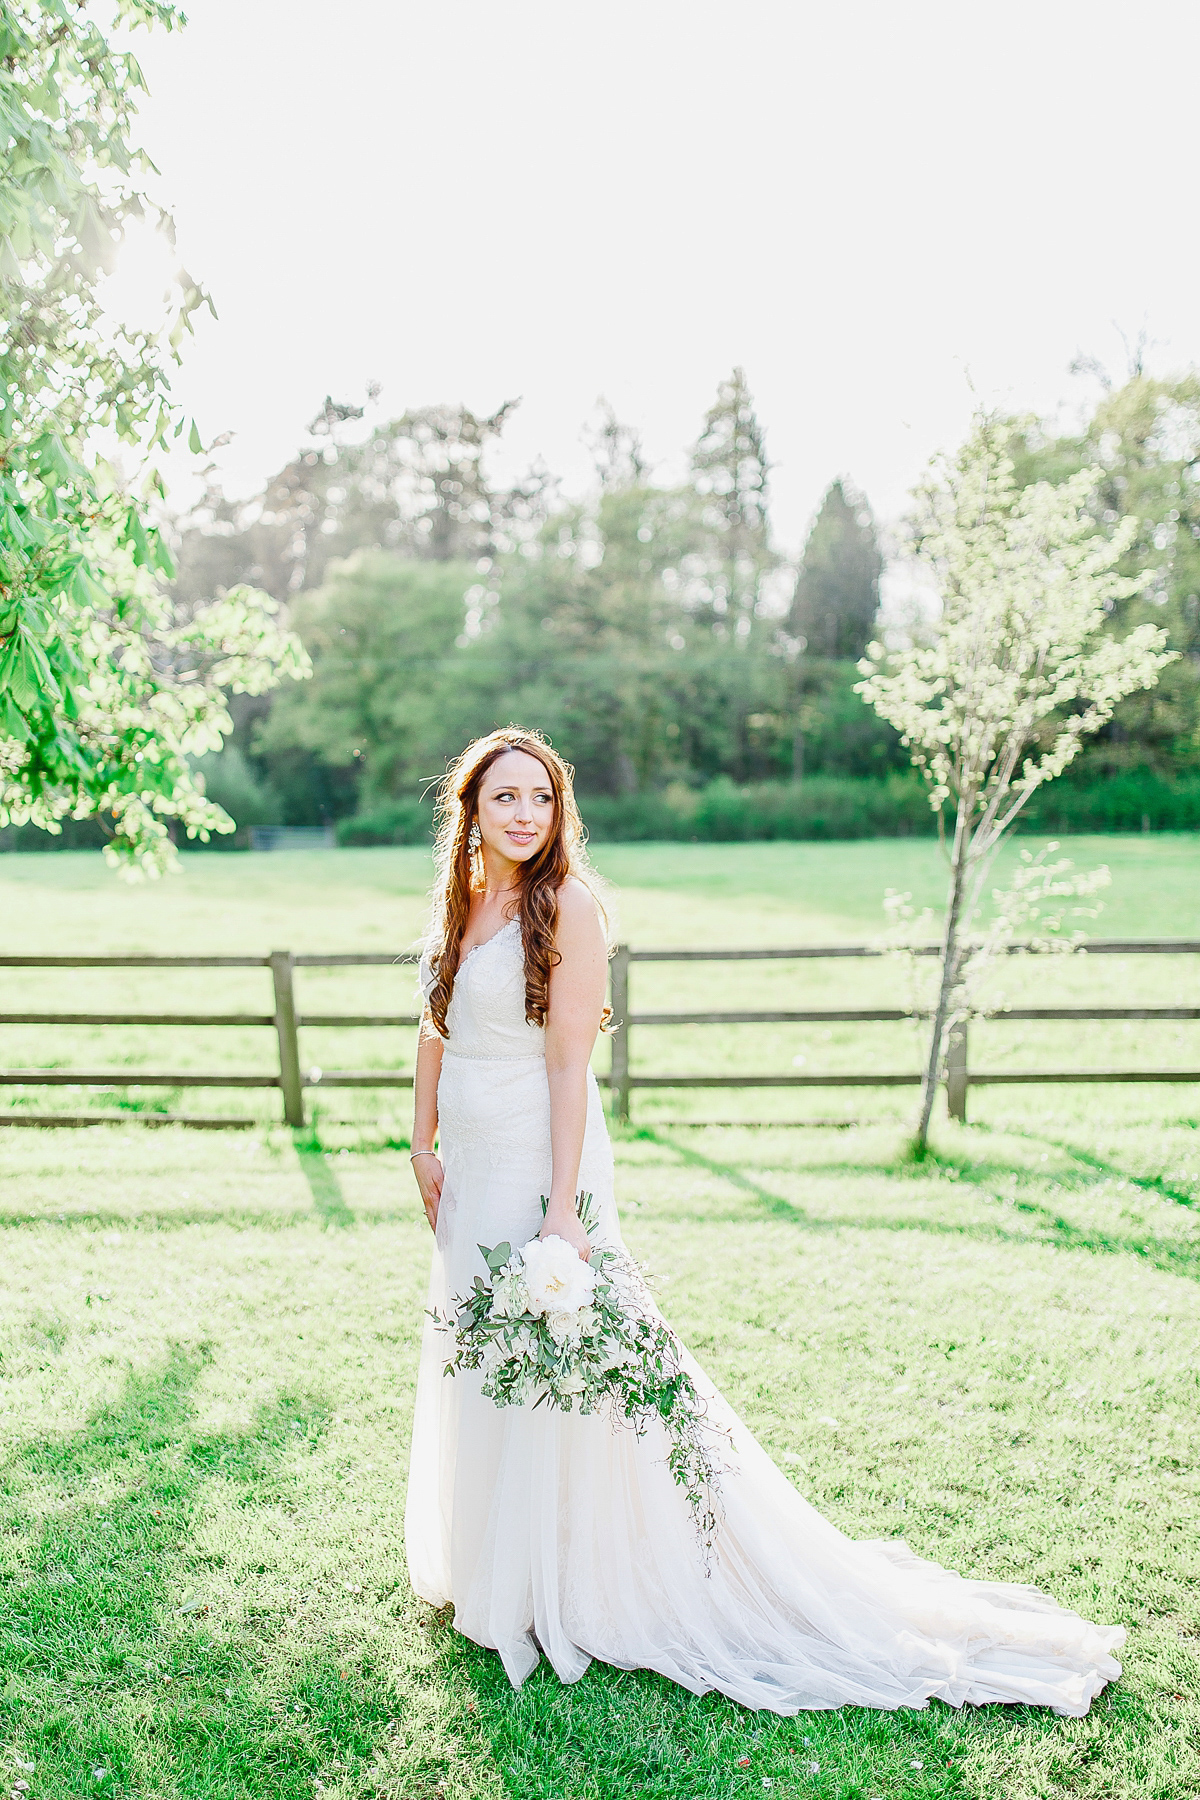 Stephanie wore a backless lace dress for her outdoor Spring wedding held at Hyde House country house hotel. Images by White Stag Photography.